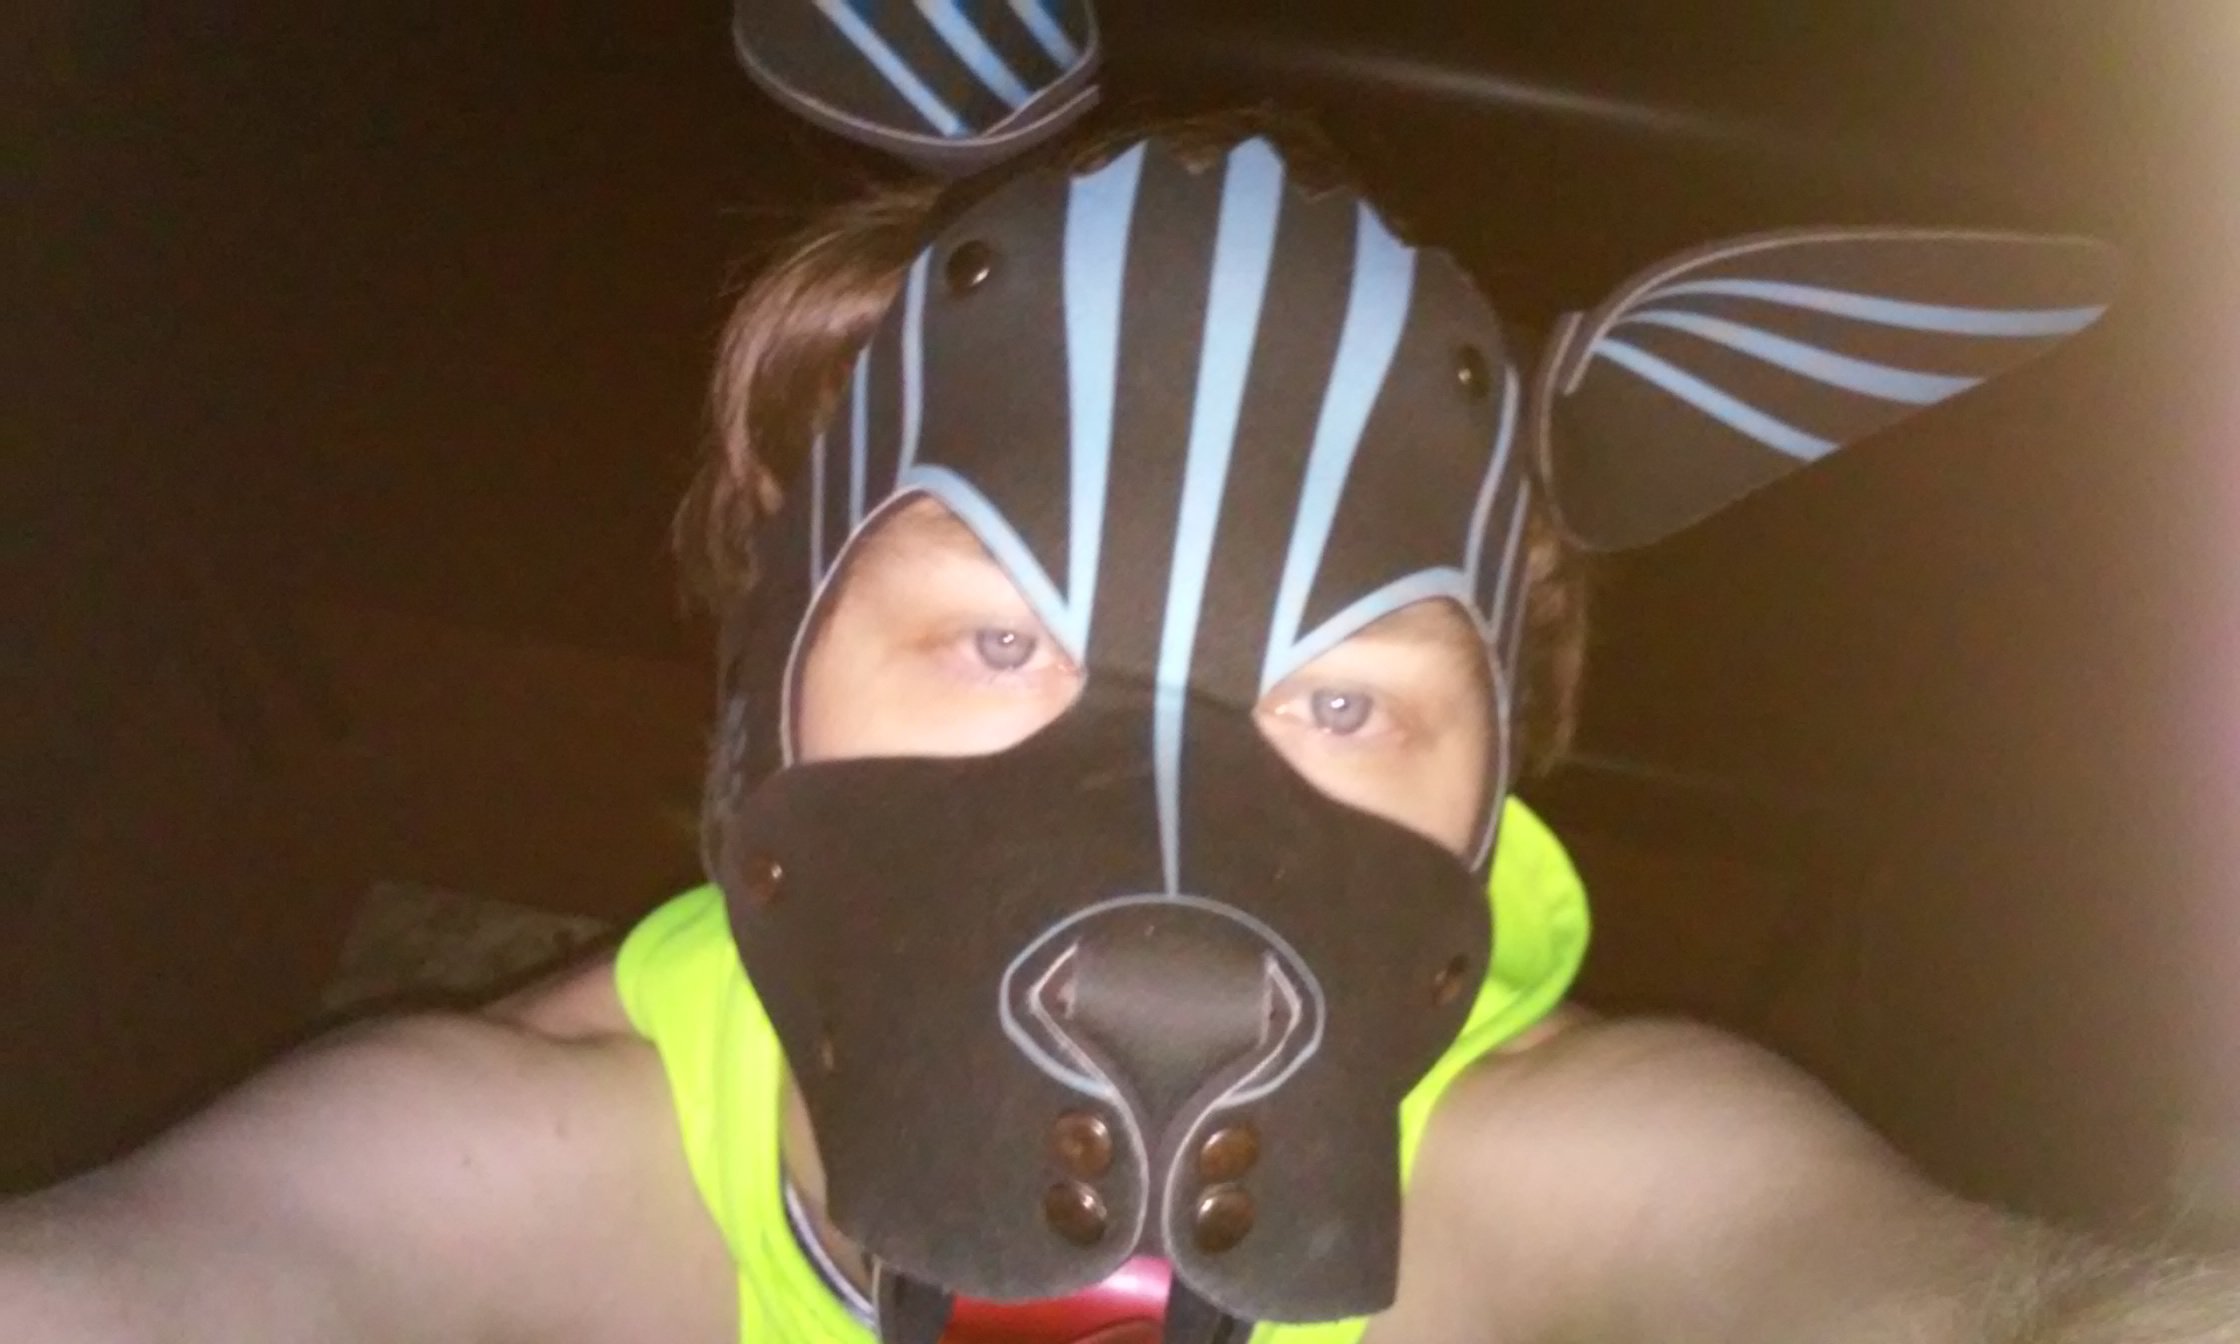 Wuff.
NSFW 18+!!! Pup, Leather, Rubber, Sport and kinky stuff